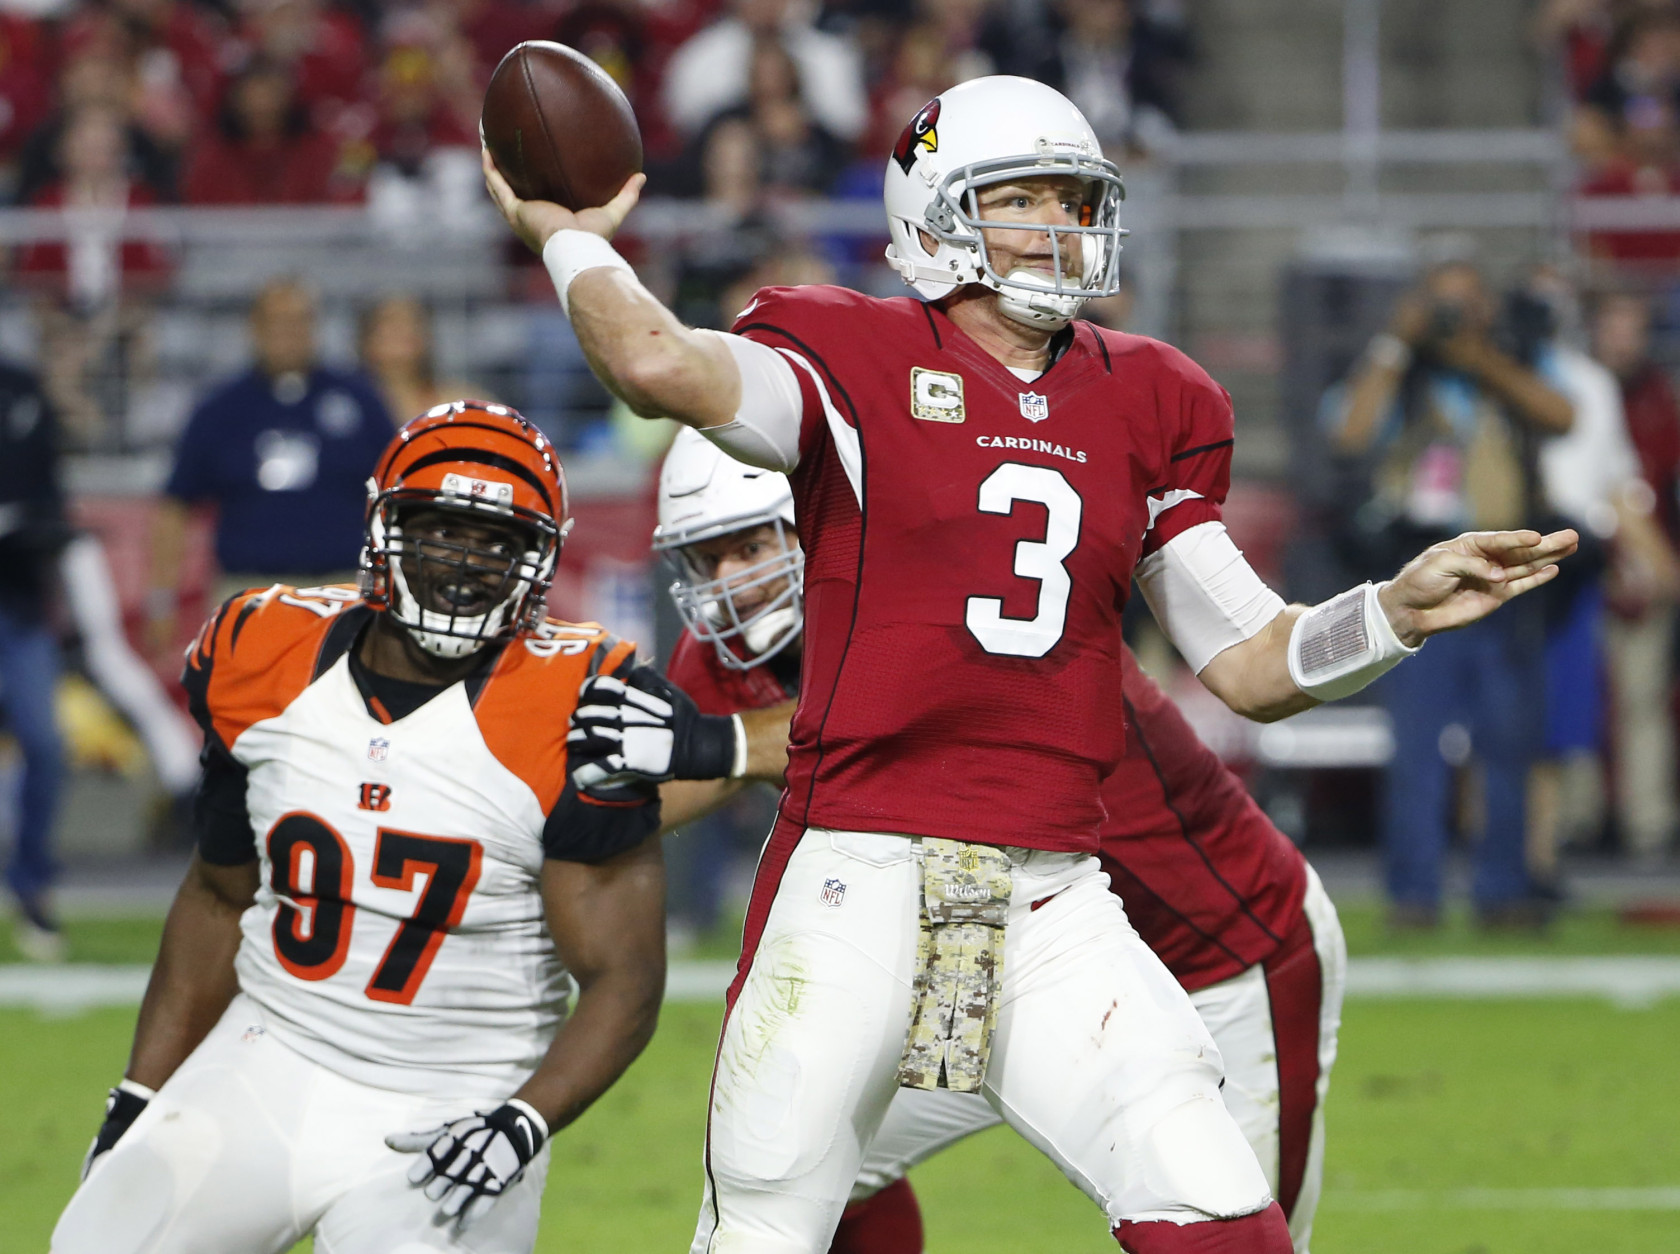 Arizona Cardinals quarterback Carson Palmer (3) throws against the Cincinnati Bengals during the first half of an NFL  football game, Sunday, Nov. 22, 2015, in Glendale, Ariz. (AP Photo/Ross D. Franklin)